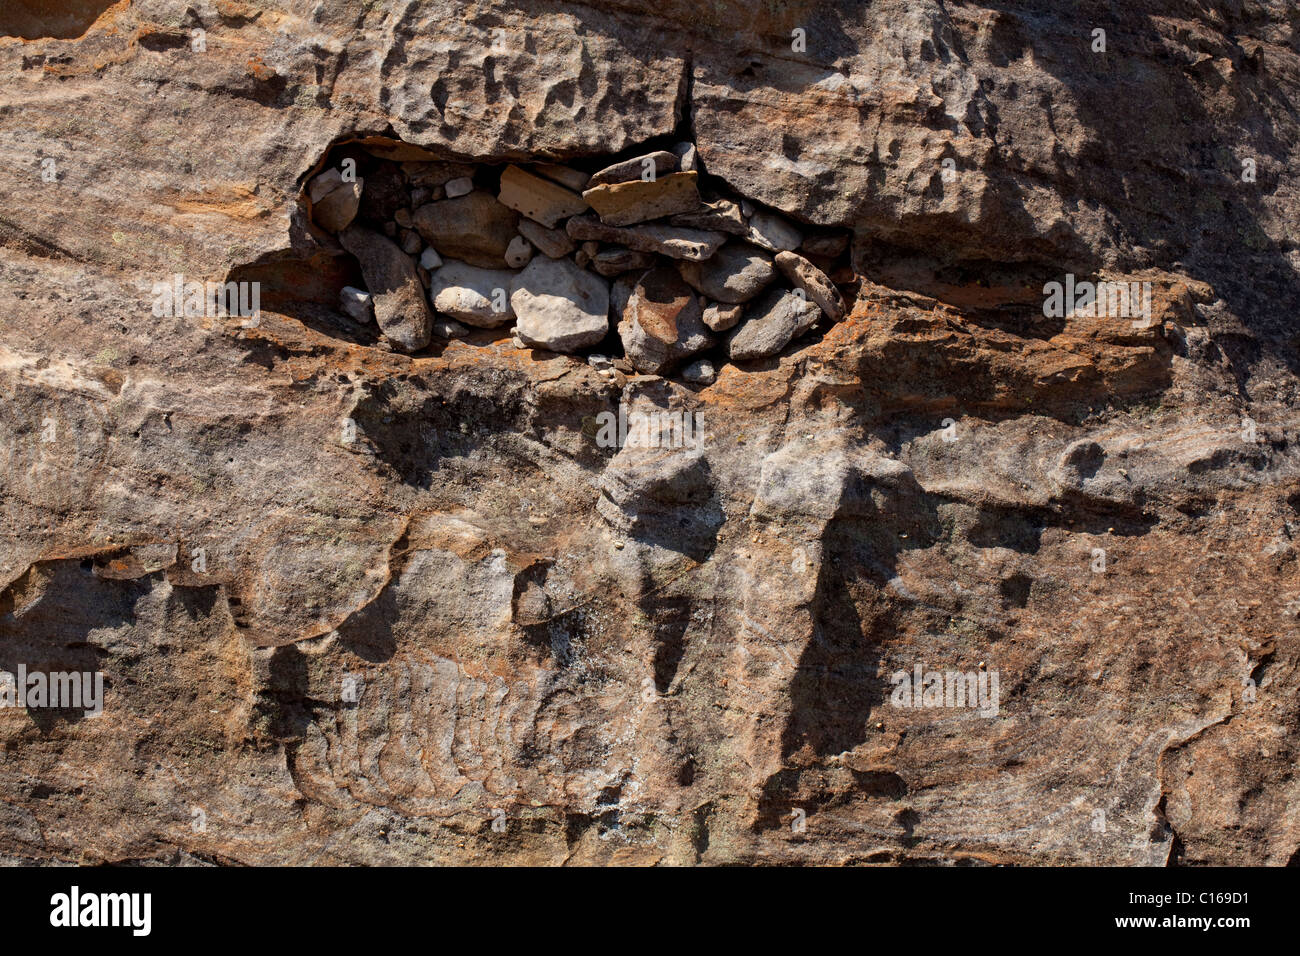 Canyon Burial Caves. Isalo National Park. Madagascar. Human bodies entombed with rocks by family members. Stock Photo